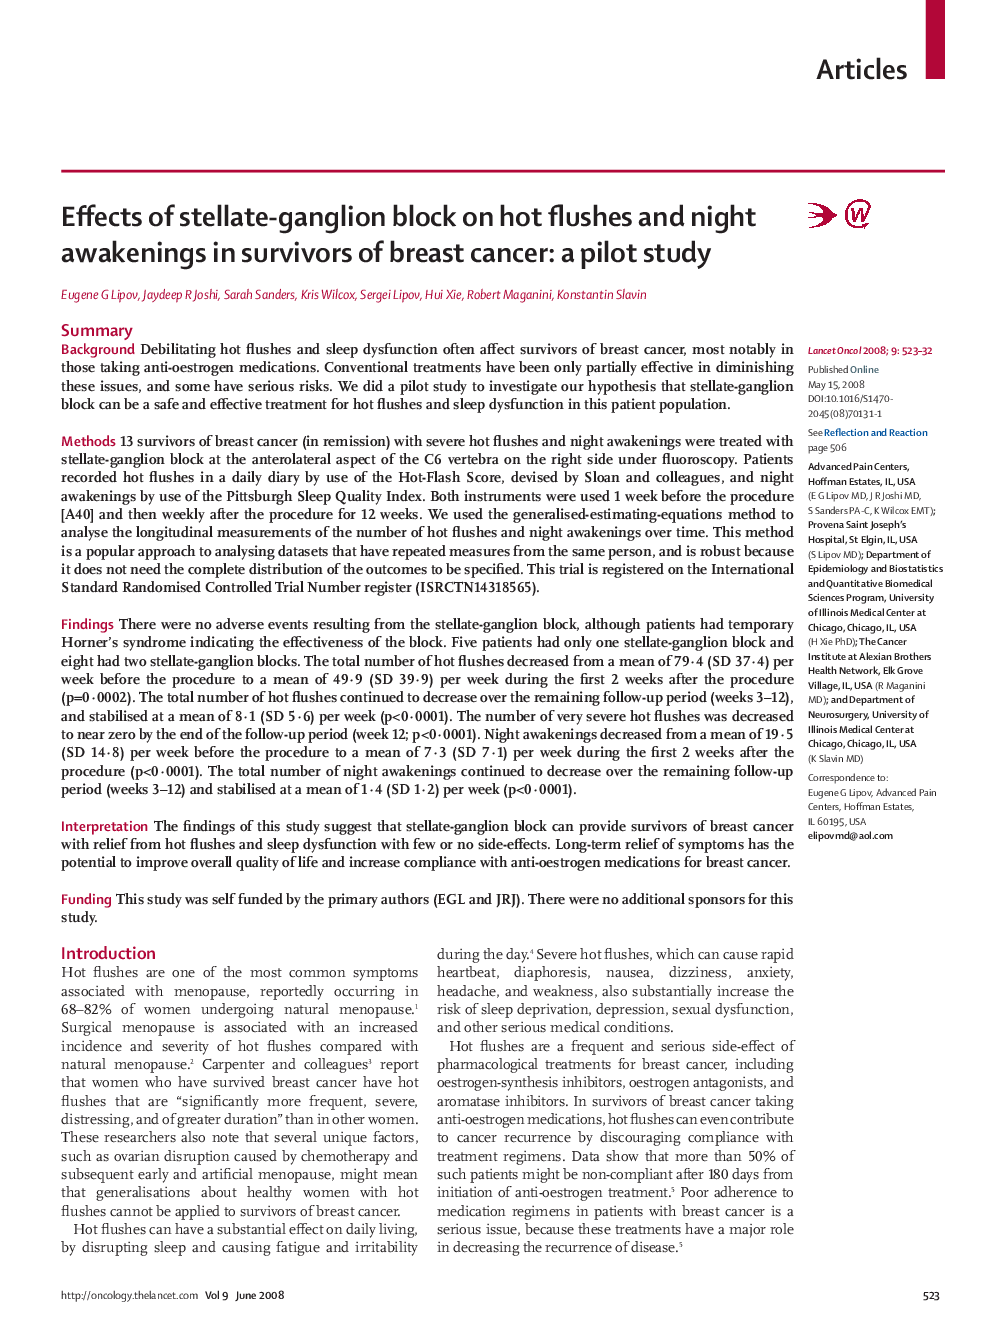 Effects of stellate-ganglion block on hot flushes and night awakenings in survivors of breast cancer: a pilot study